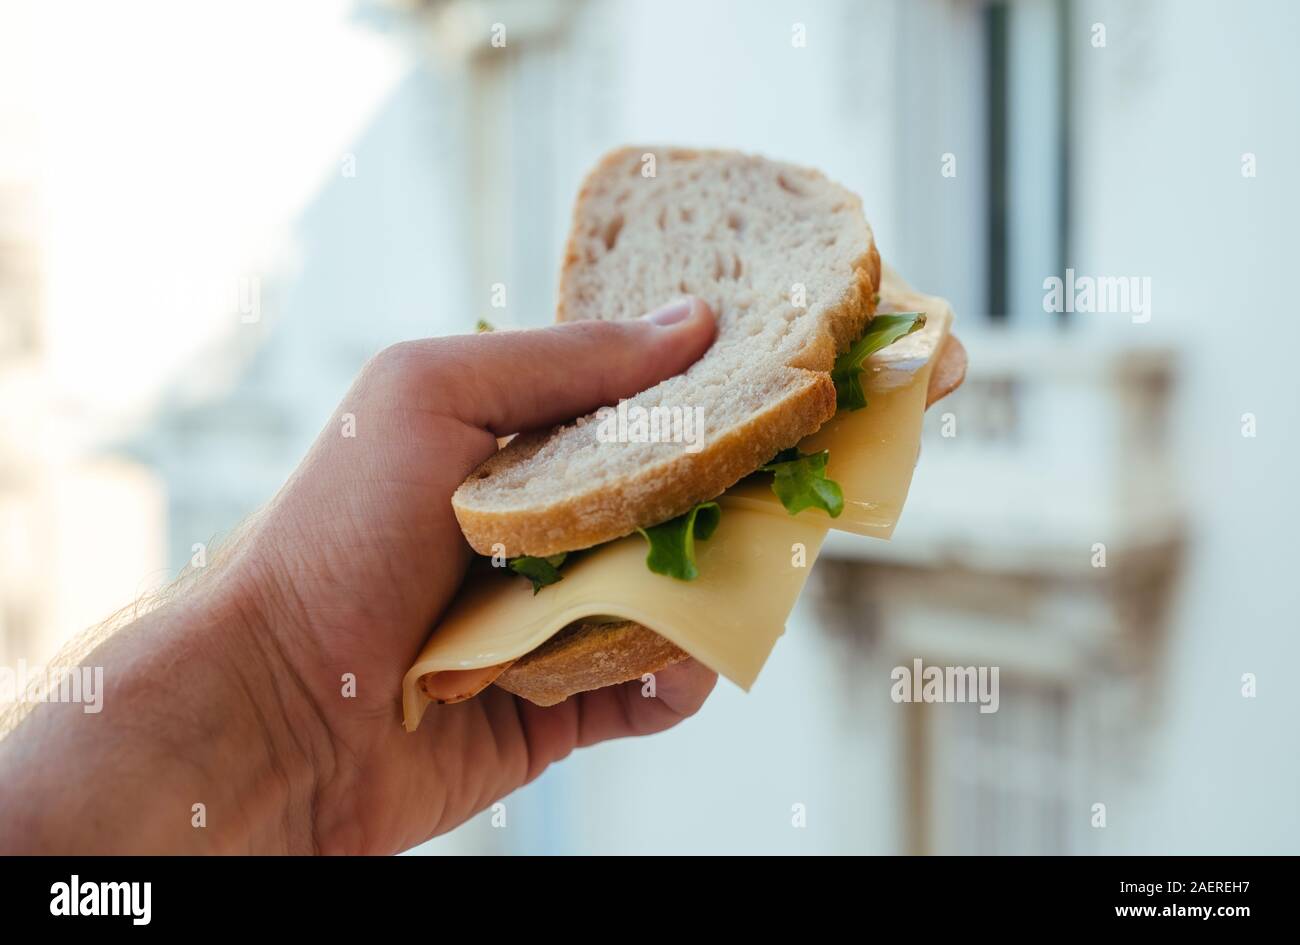 White bread Sandwich with Hum and Salad in man's hand in Monaco Stock Photo